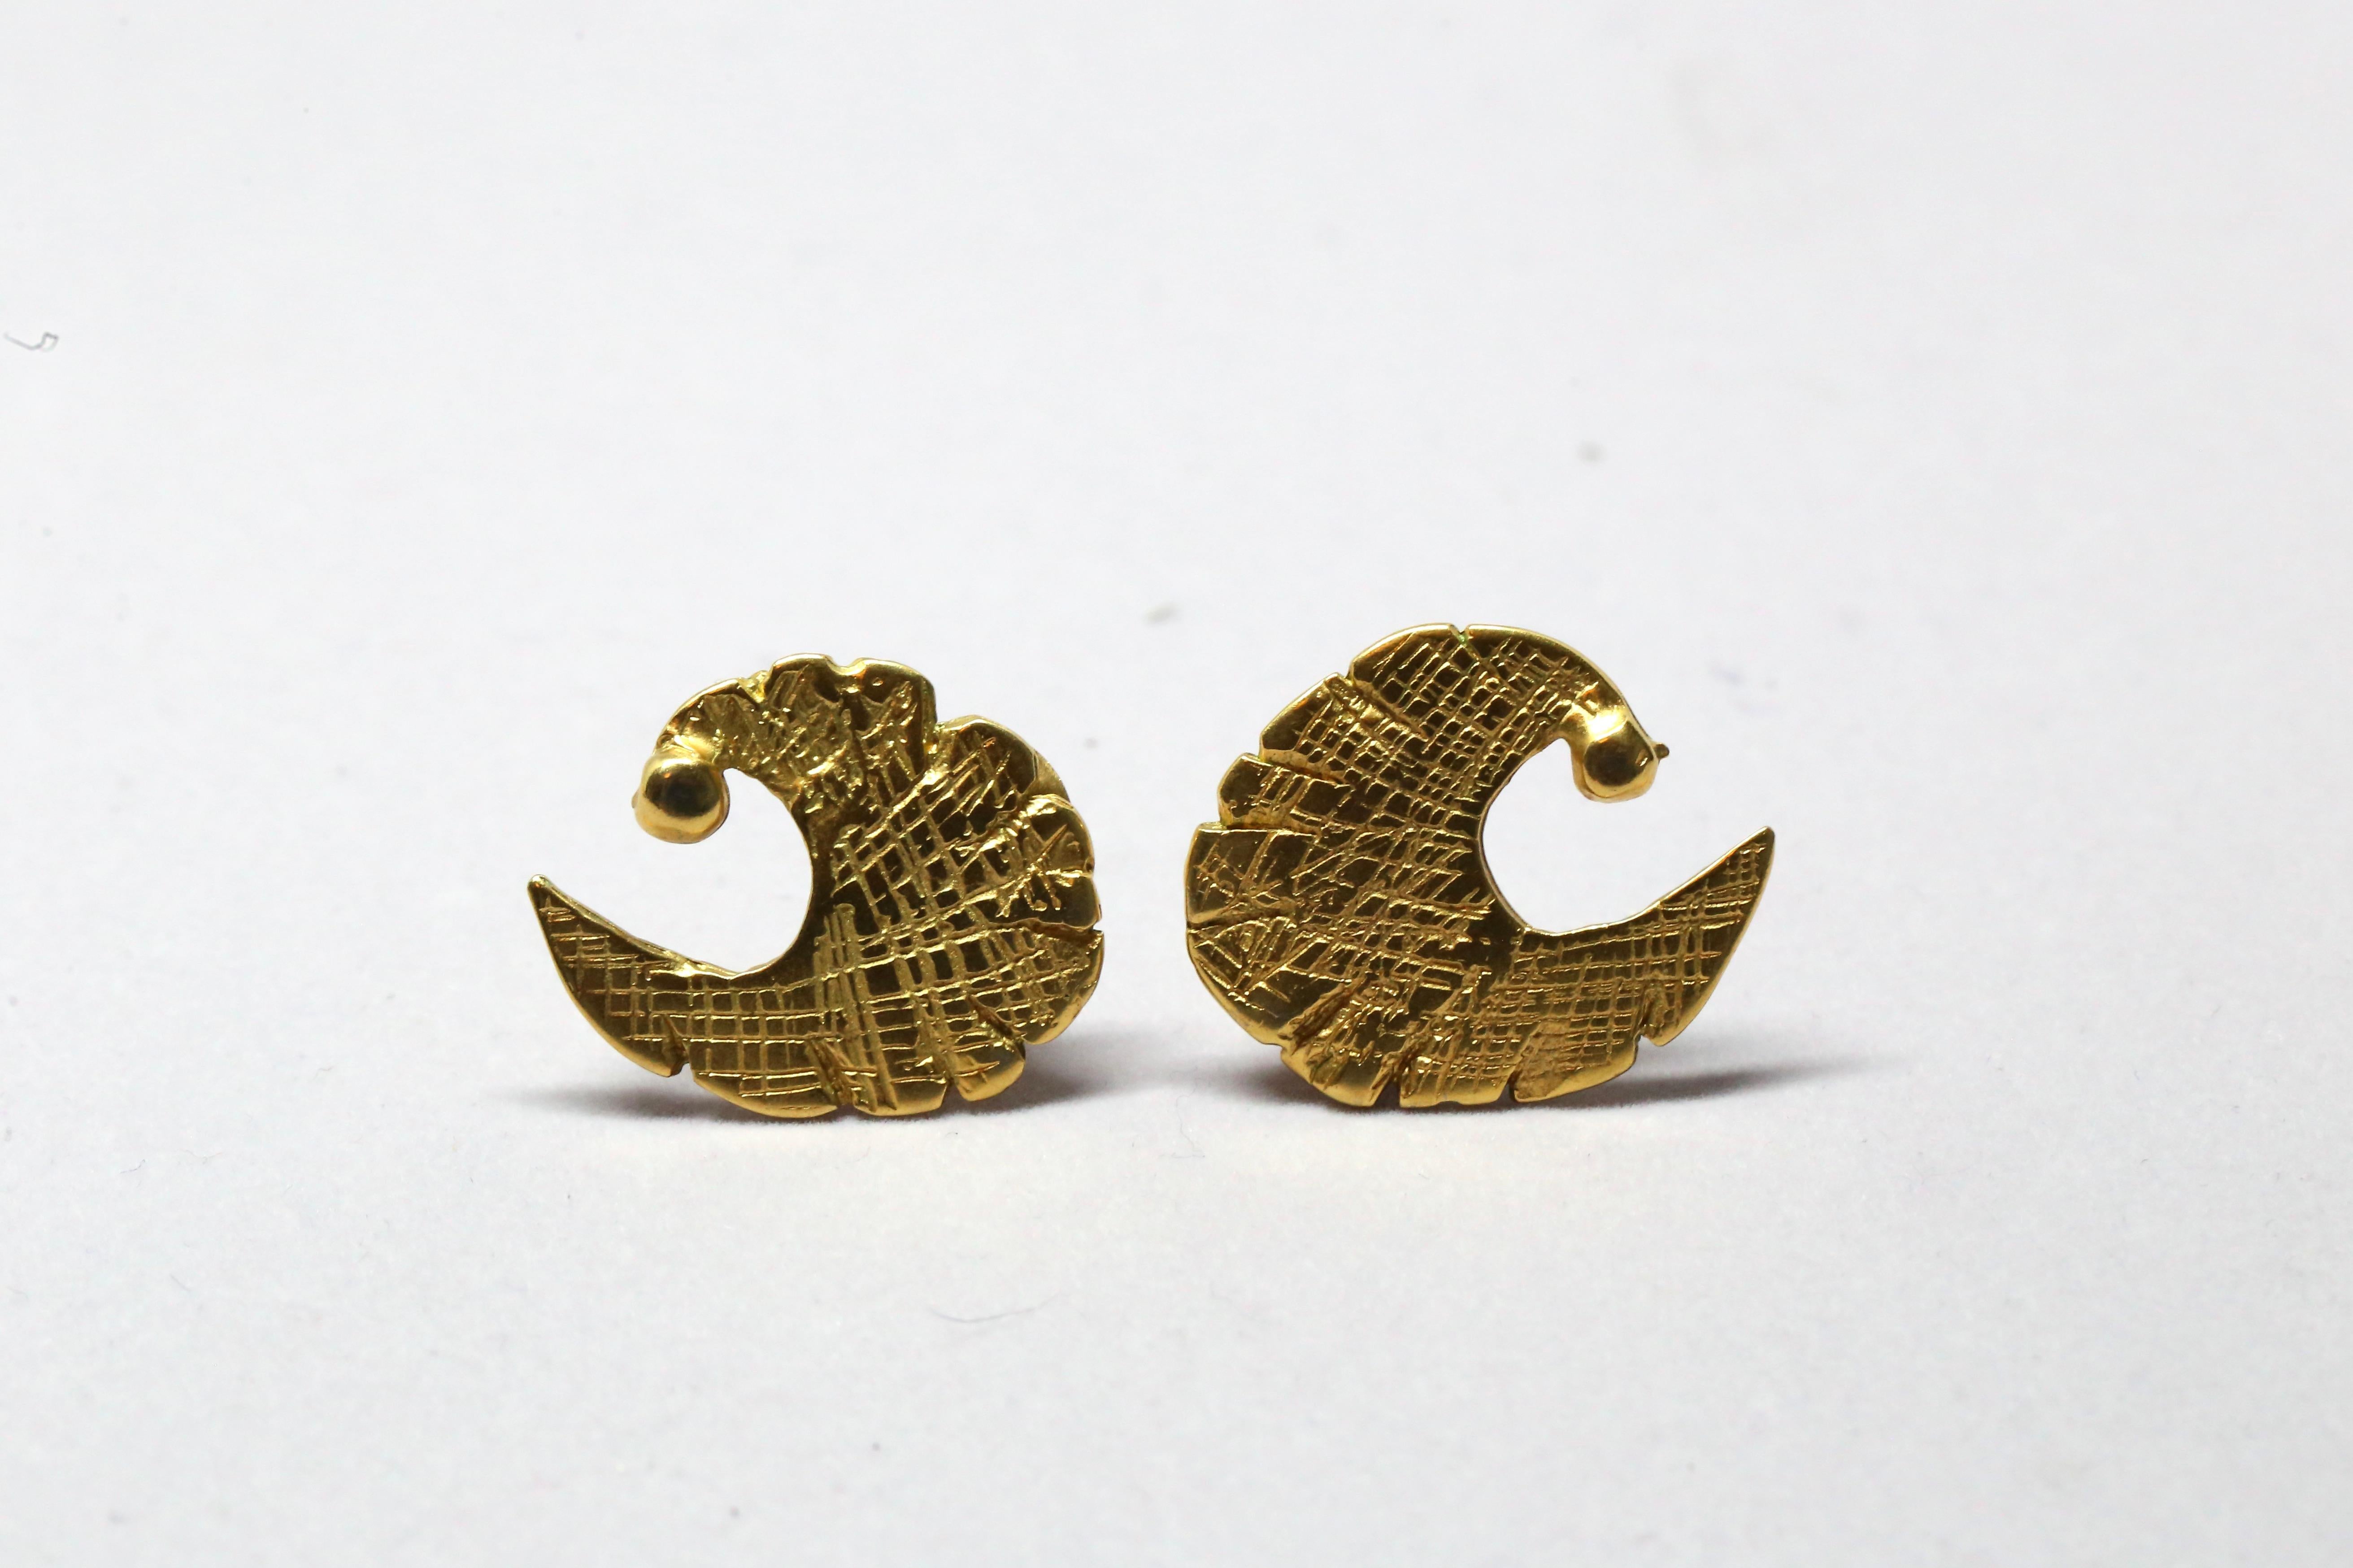 Abstract shaped gilt earrings done in the shape of a 'C' from Pierre Cardin dating to the 1960's. Clip backs. Earrings measures approximately 1.25